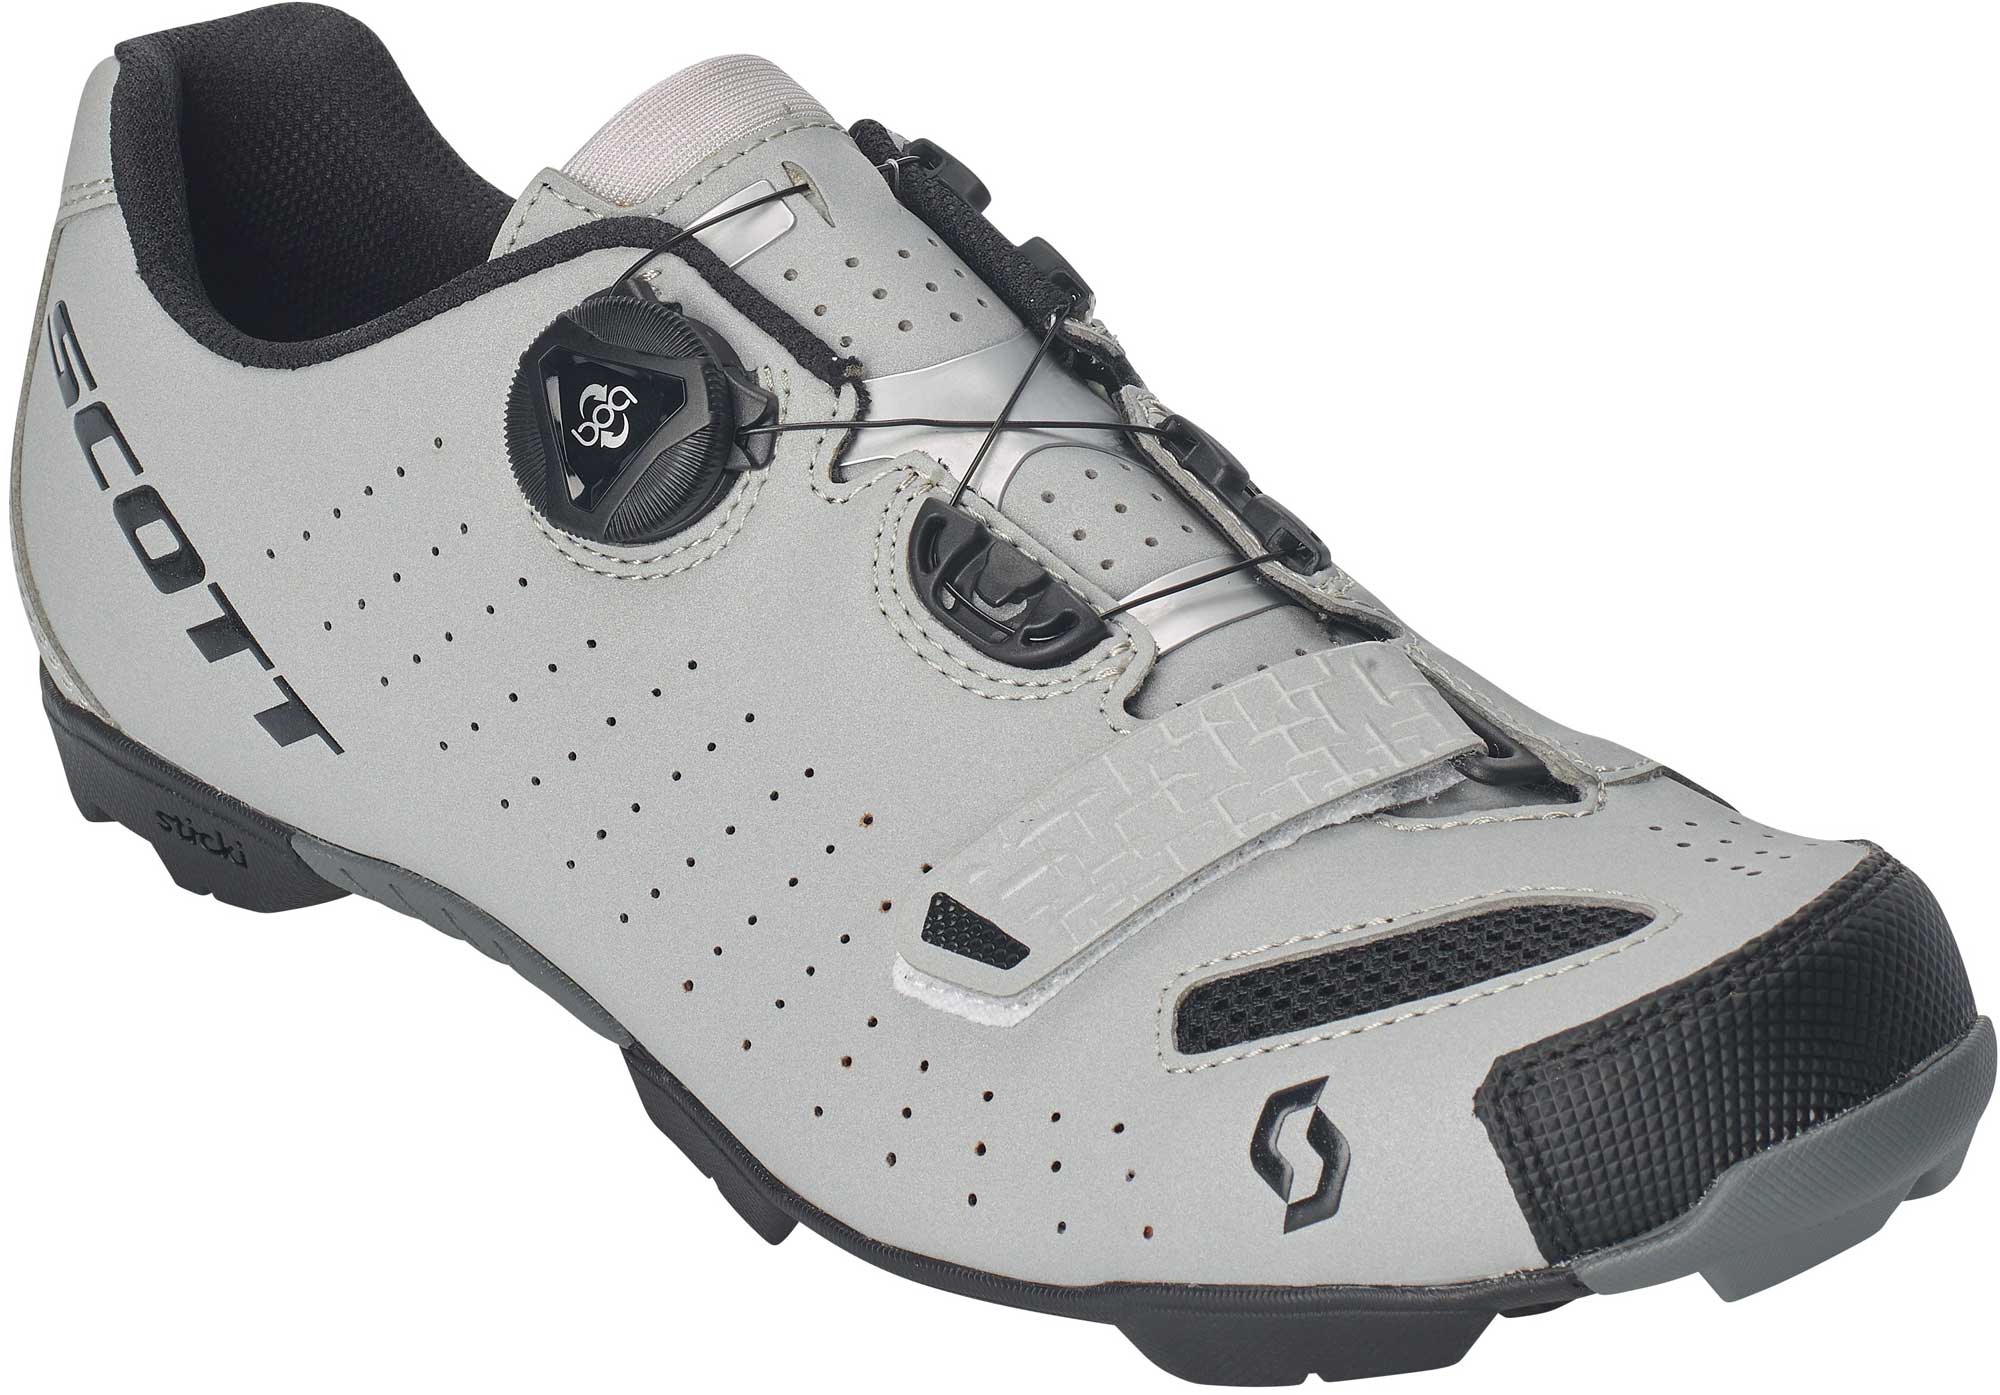 Cycling shoes